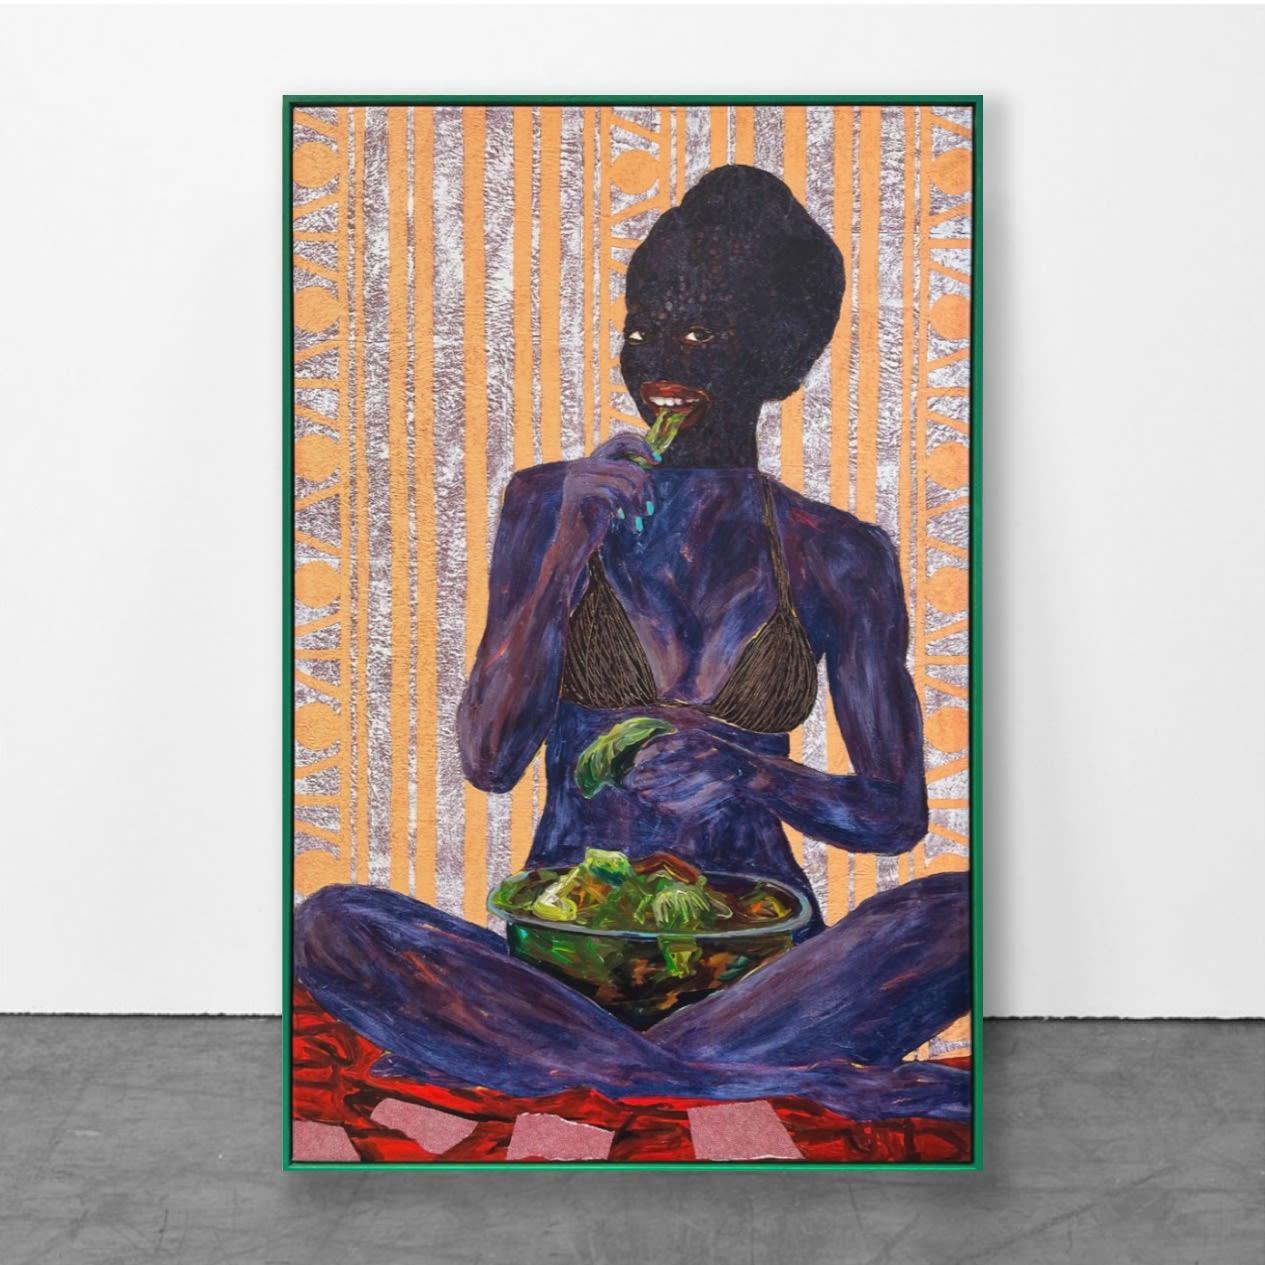 Smiling Girl Eating Salad, by Collin Sekajugo, 2022 Contemporary African Art